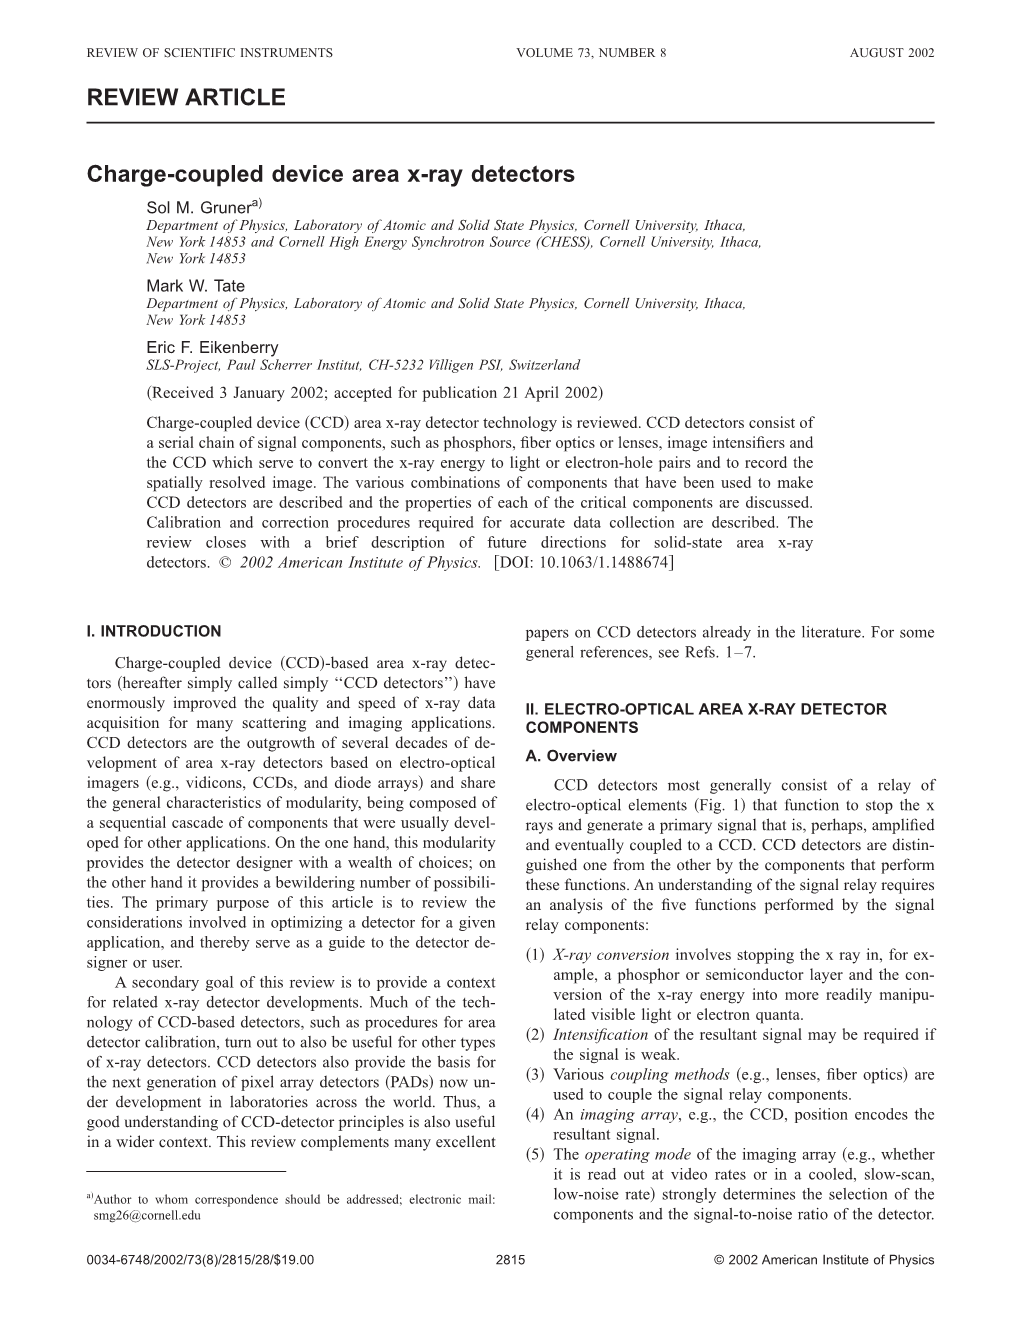 REVIEW ARTICLE Charge-Coupled Device Area X-Ray Detectors